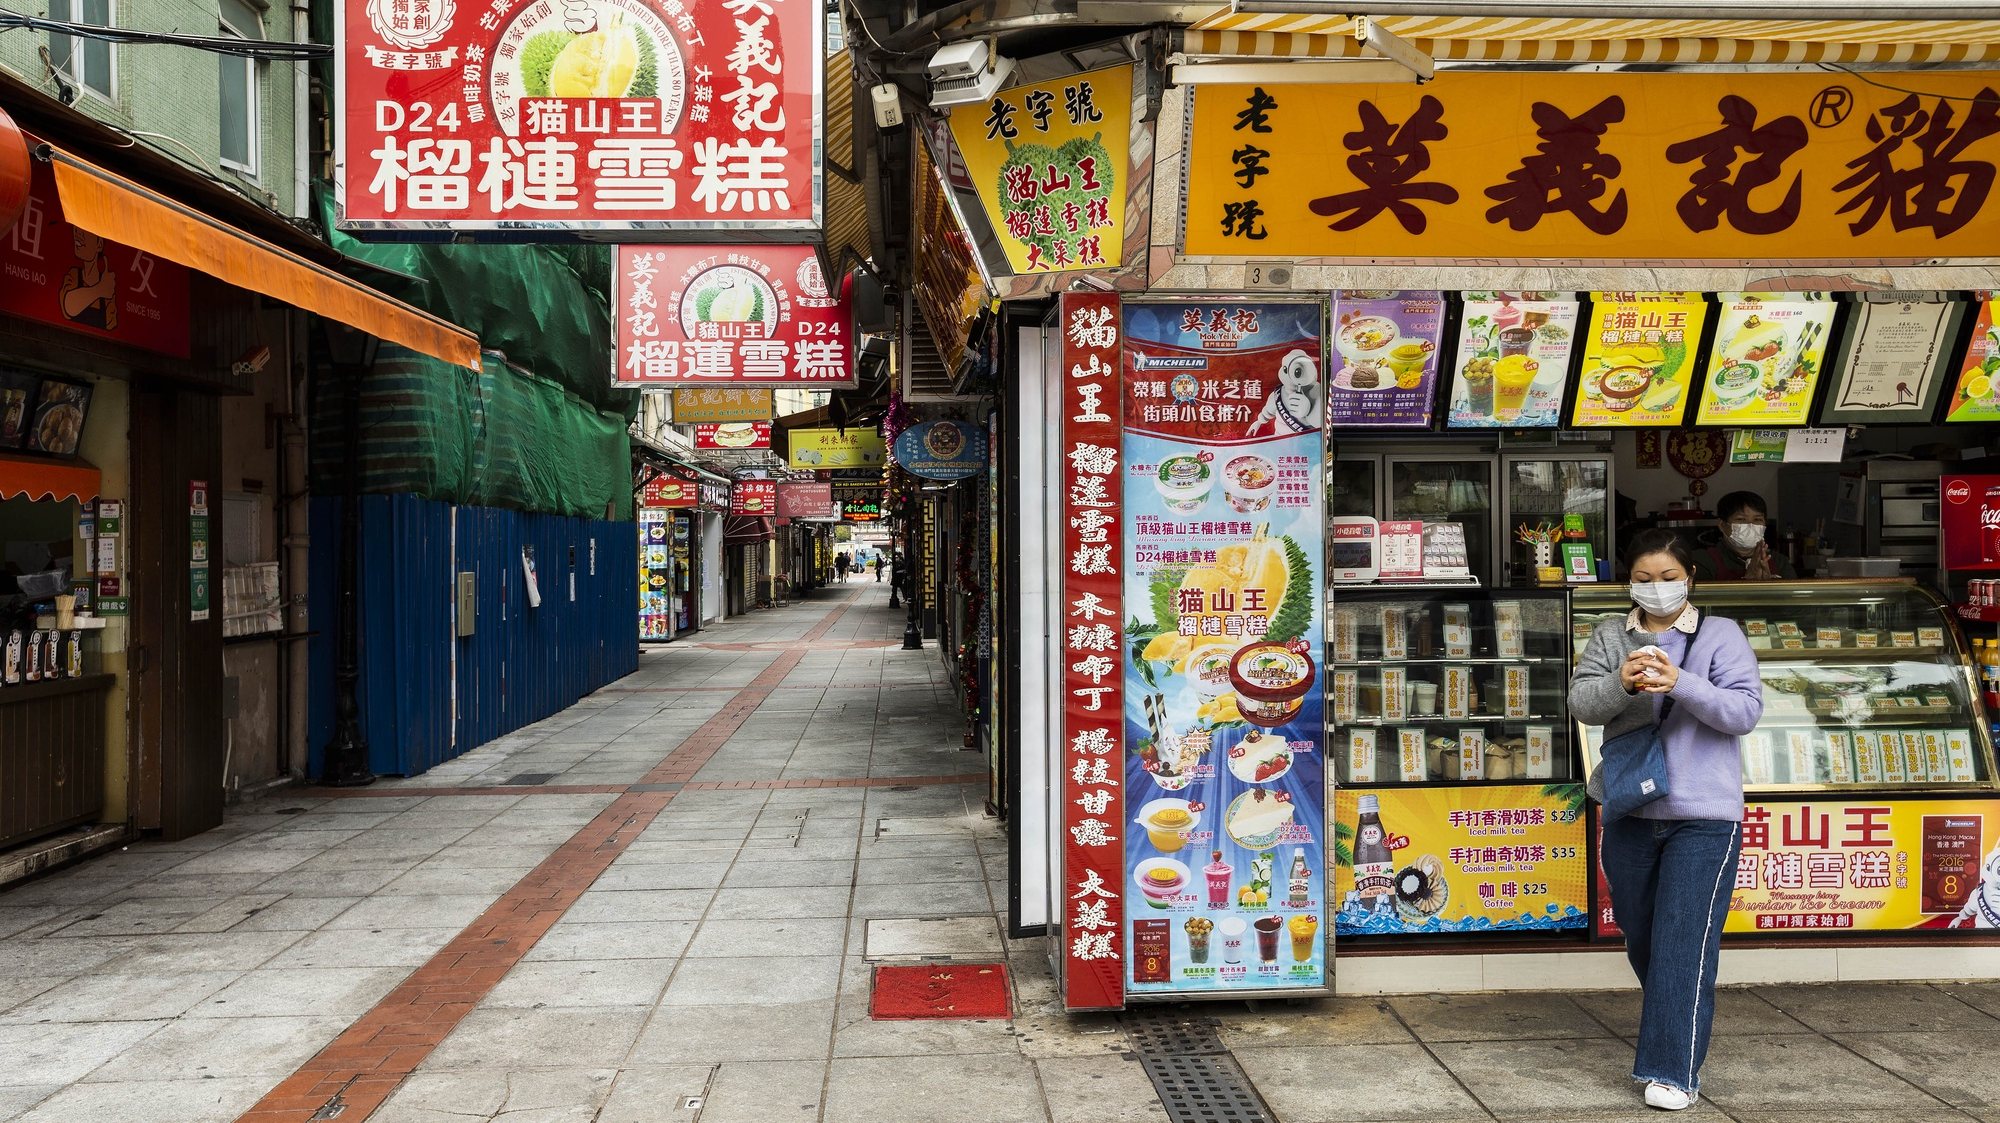 An open food store in an empty street in Macao, China, 07 February 2020. The coronavirus outbreak is contaminating local Portuguese businesses in Macao, robbing customers and hoping to recover, in some cases, the financial health that protests in Hong Kong had already compromised. CARMO CORREIA/LUSA